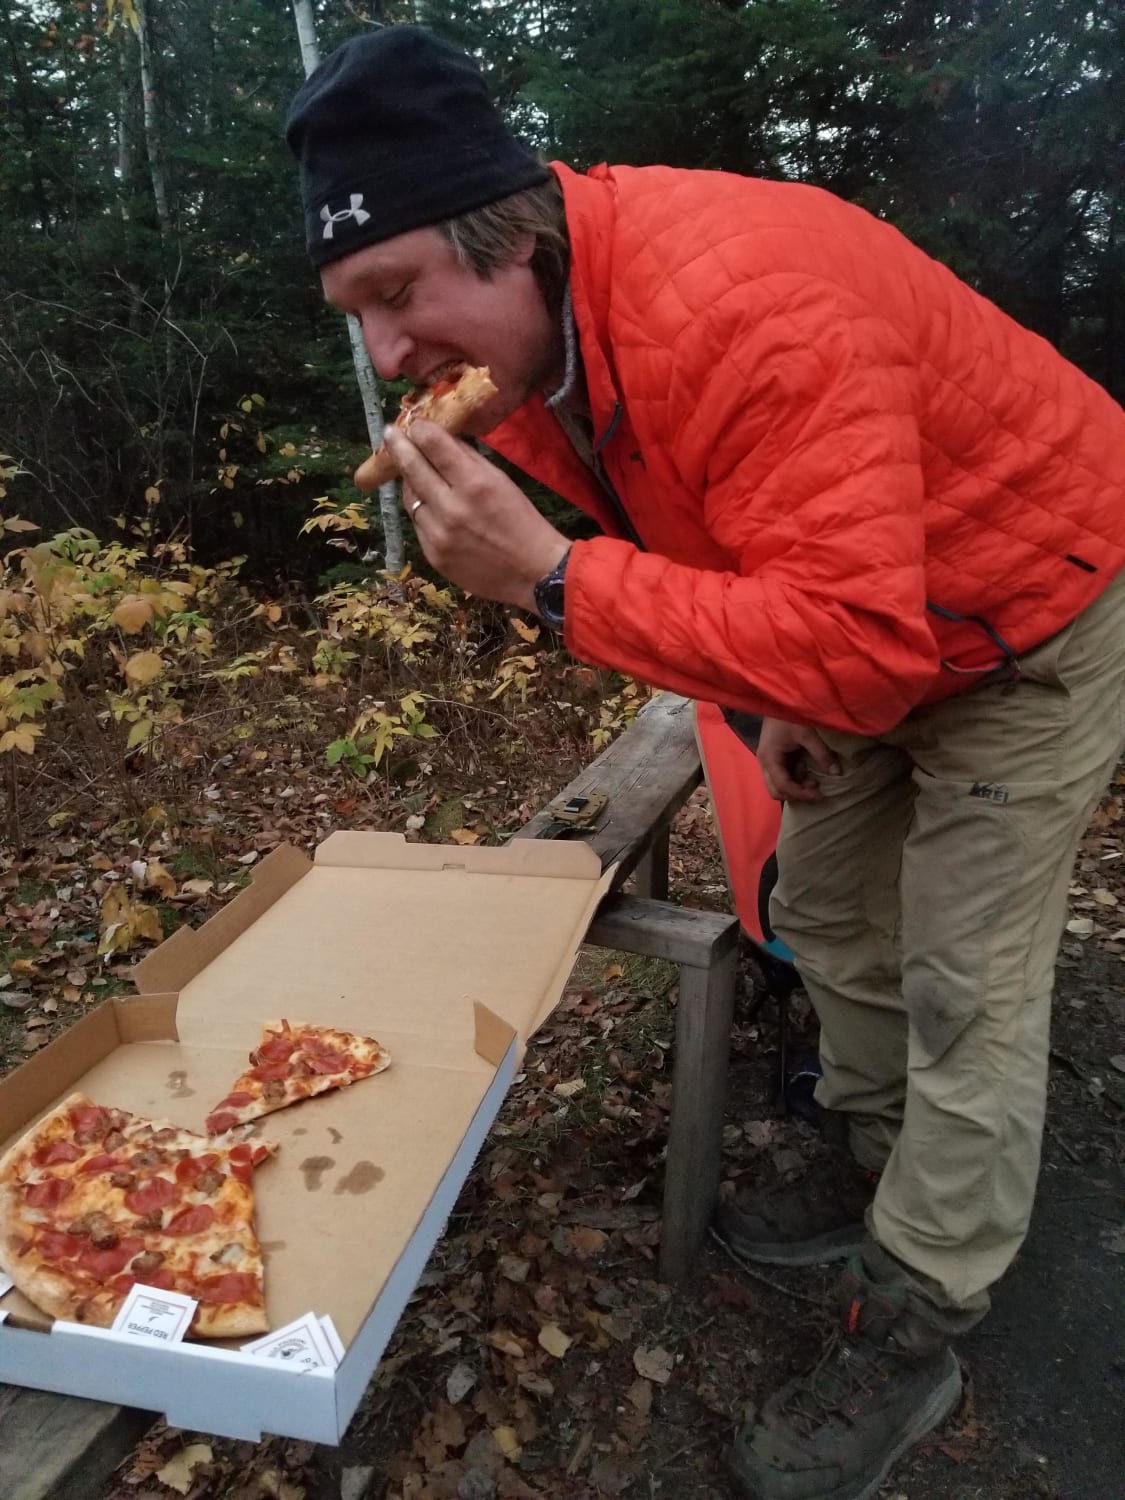 Trail magic, superior hiking trail lutsen MN. Two fellow hikers brought our group of a 3 a pizza from a mile away.